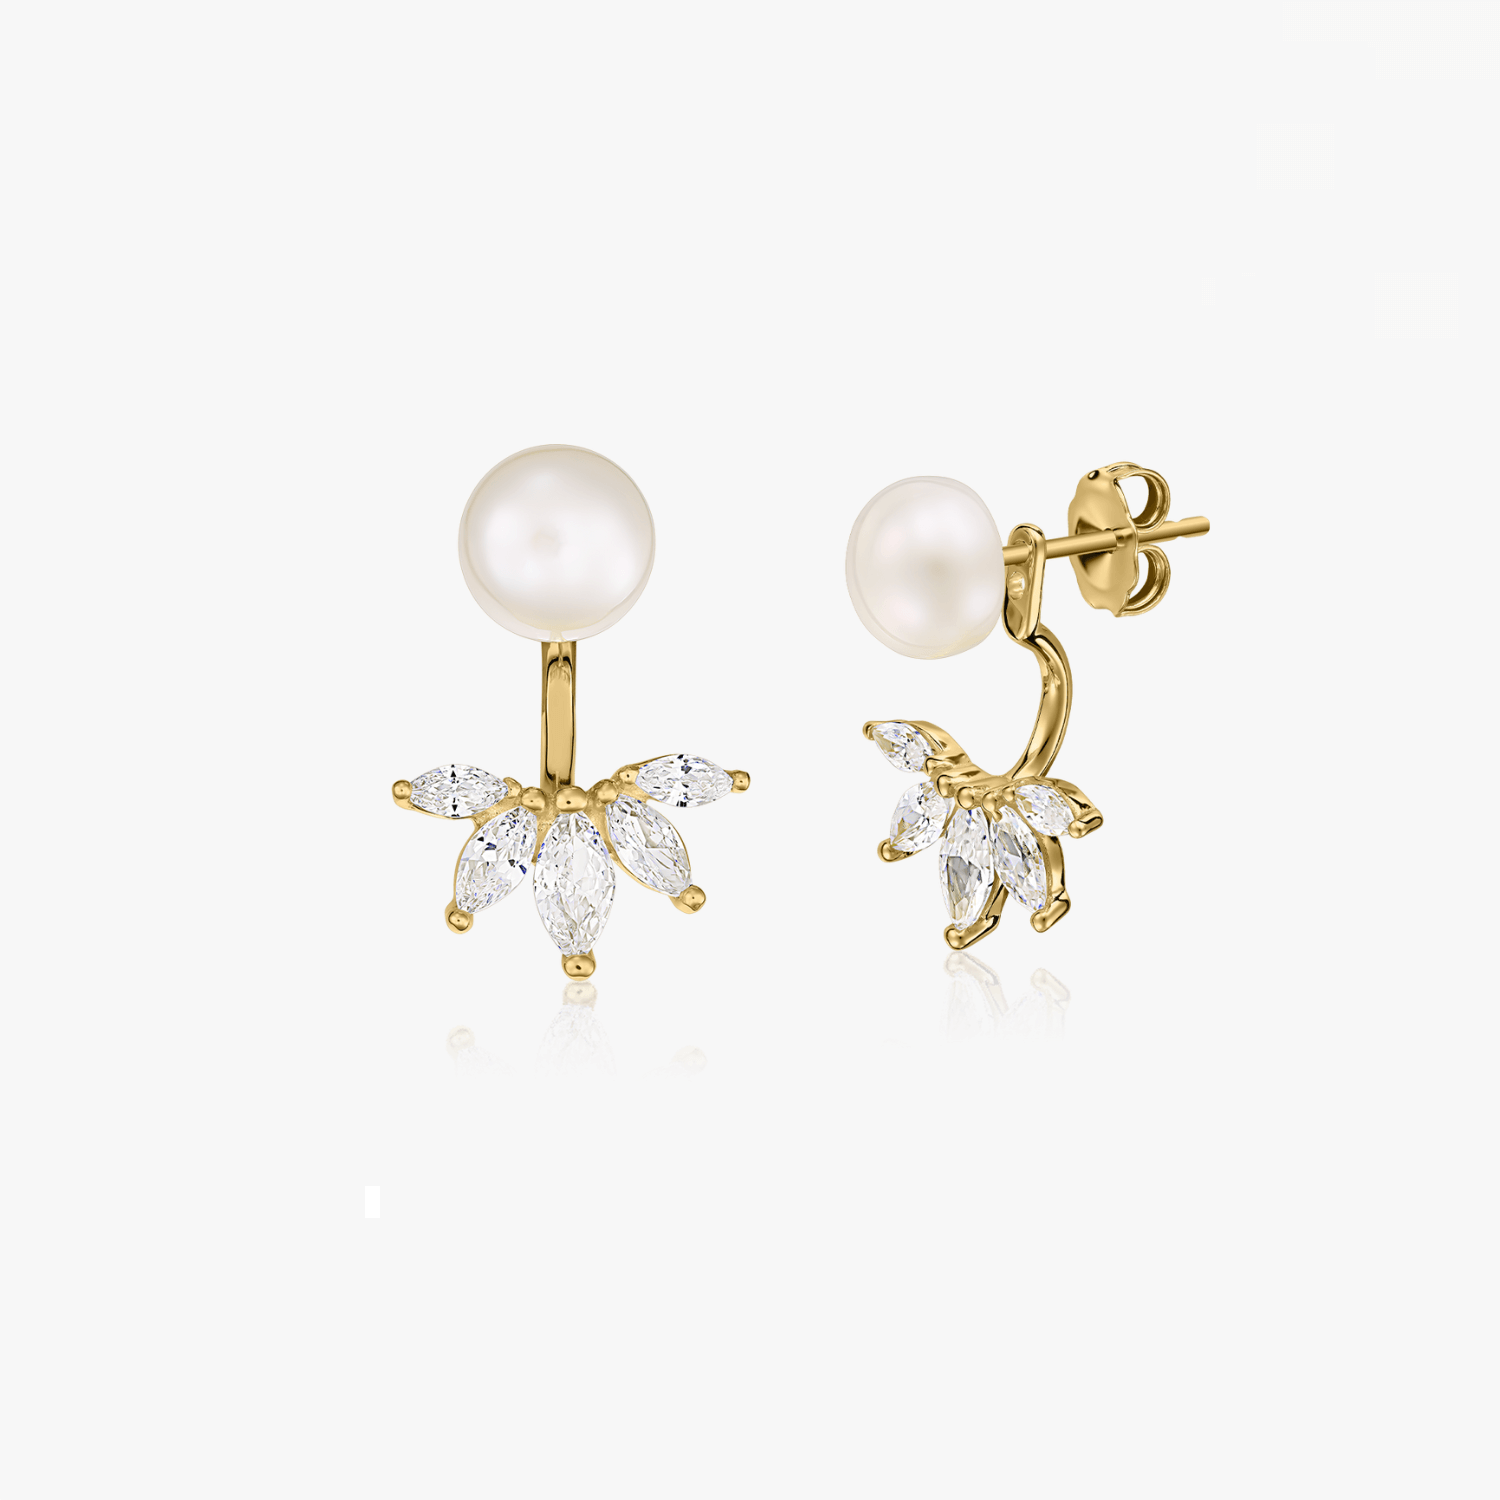 Golden Day to Night Silver Earrings - Natural Pearls